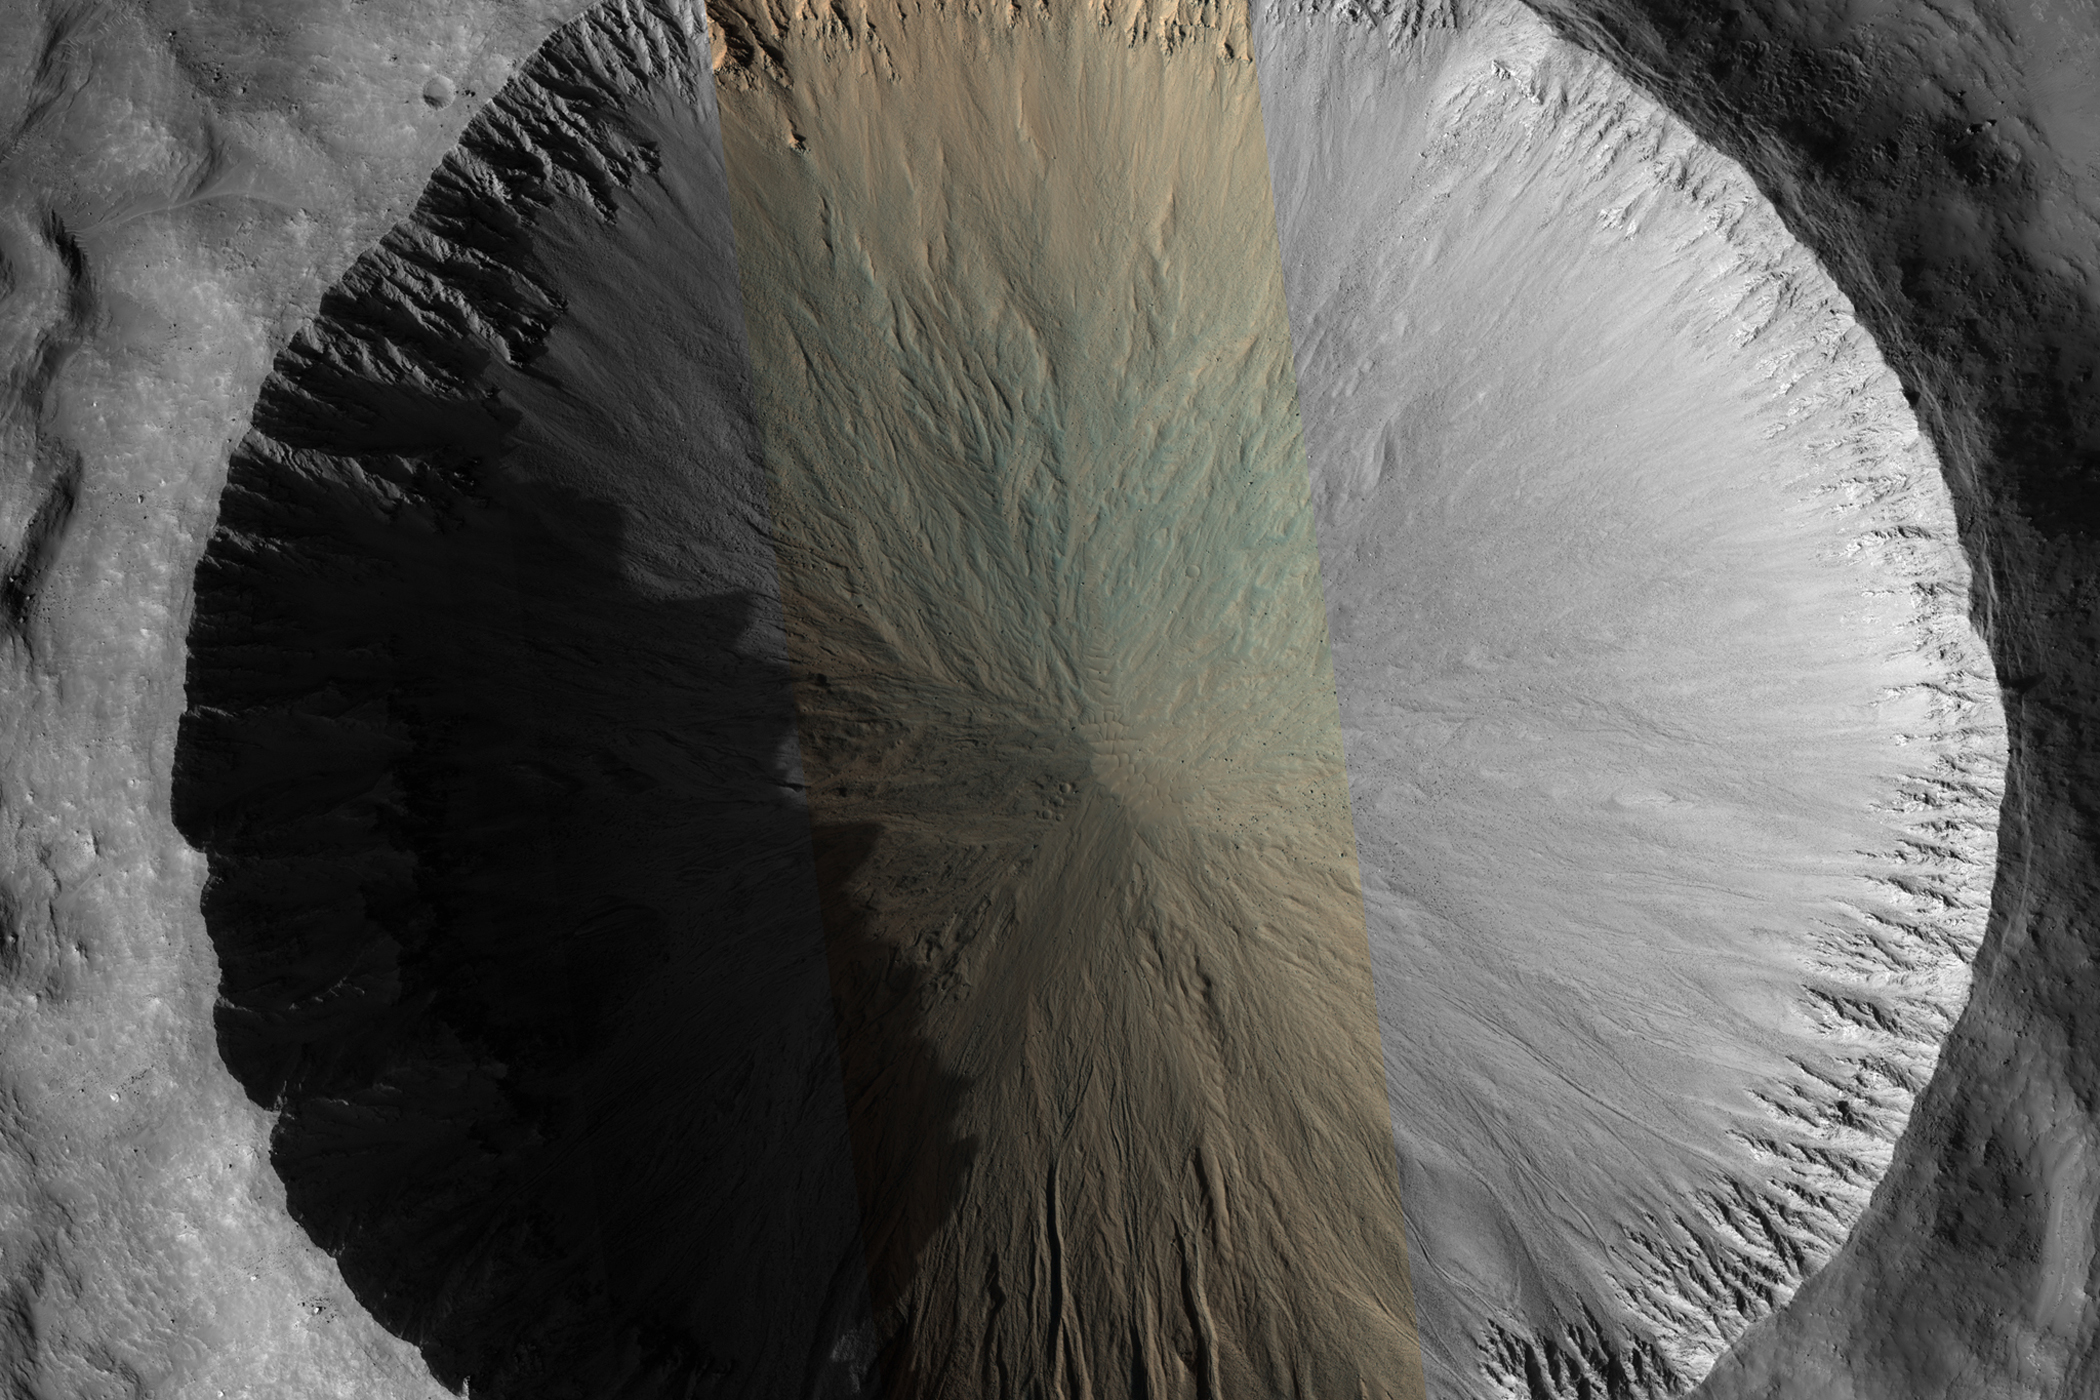 The 4 kilometer (2.5 mile) diameter crater in this image appears relatively fresh, but not remarkably so.